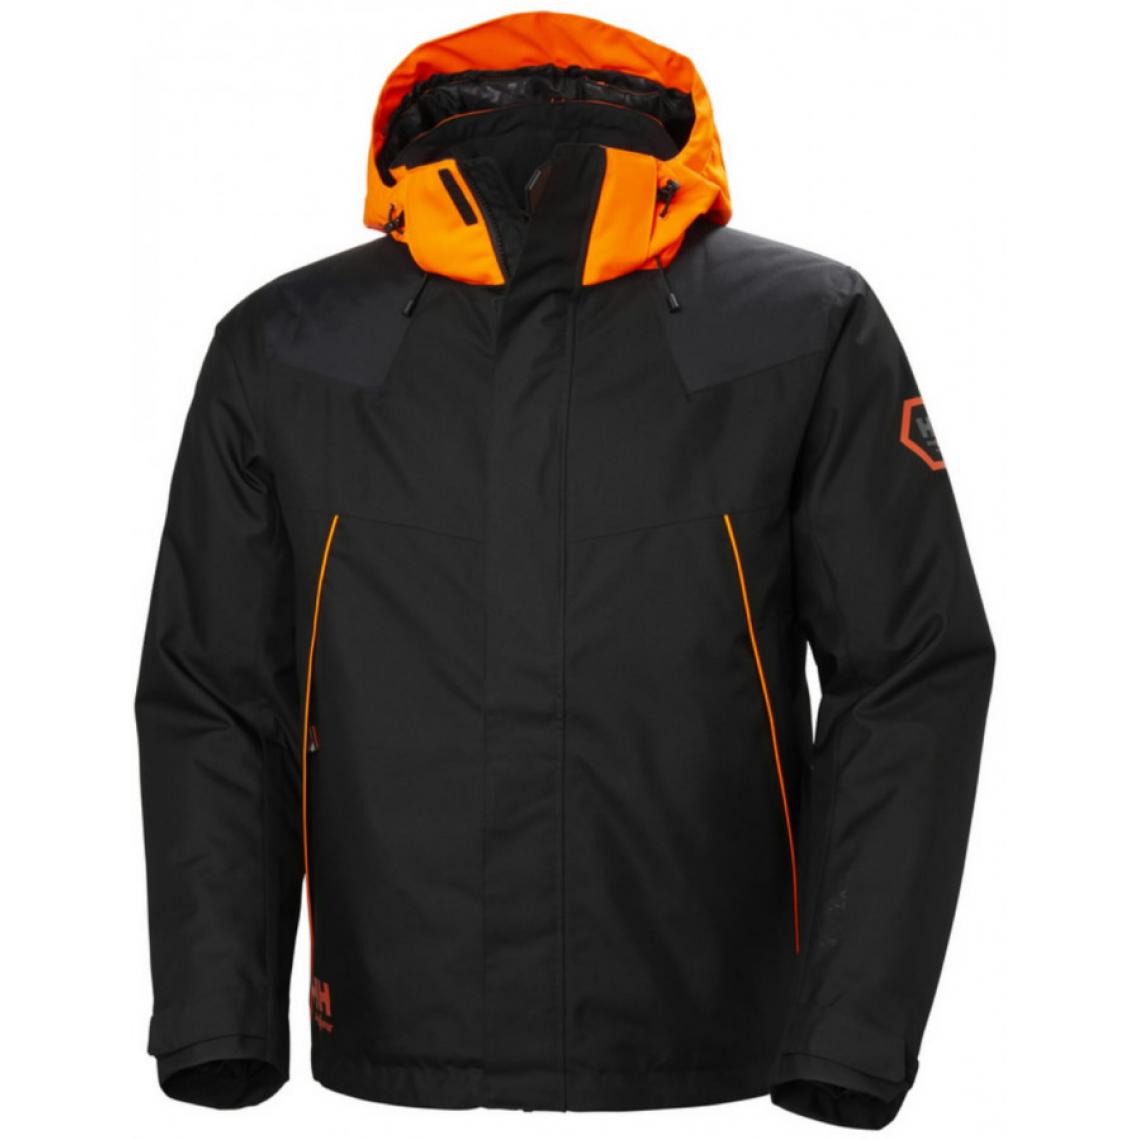 Helly Hansen - Veste hiver Chelsea Evolution HELLY HANSEN - T.L - 71340_950_L - Protections corps